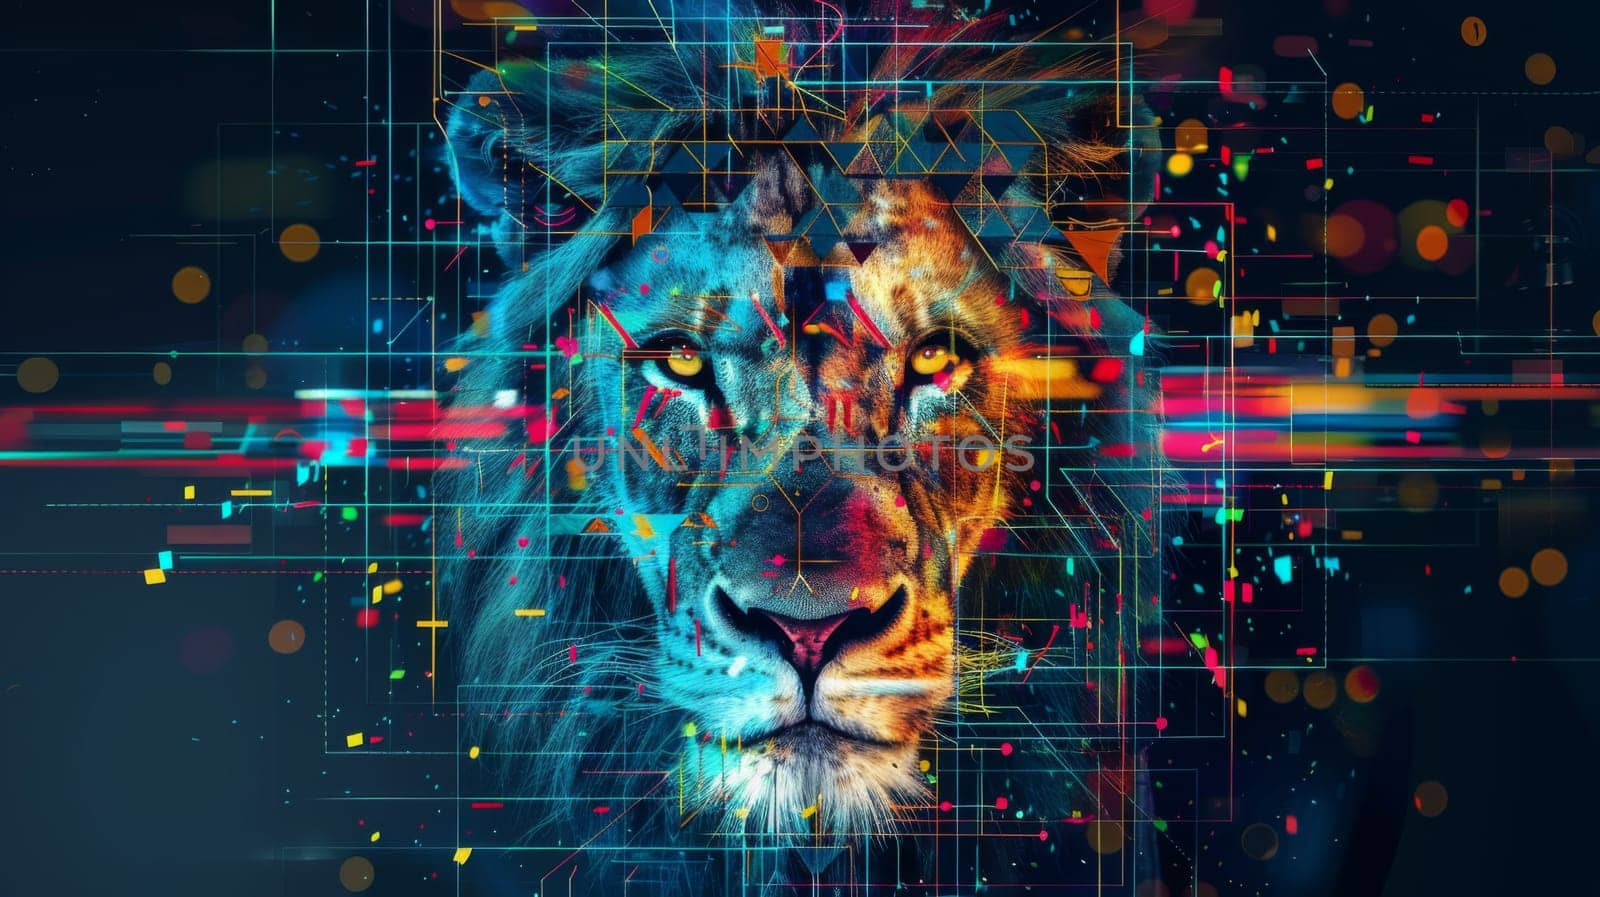 A digital image of a lion with geometric patterns surrounding it, AI by starush